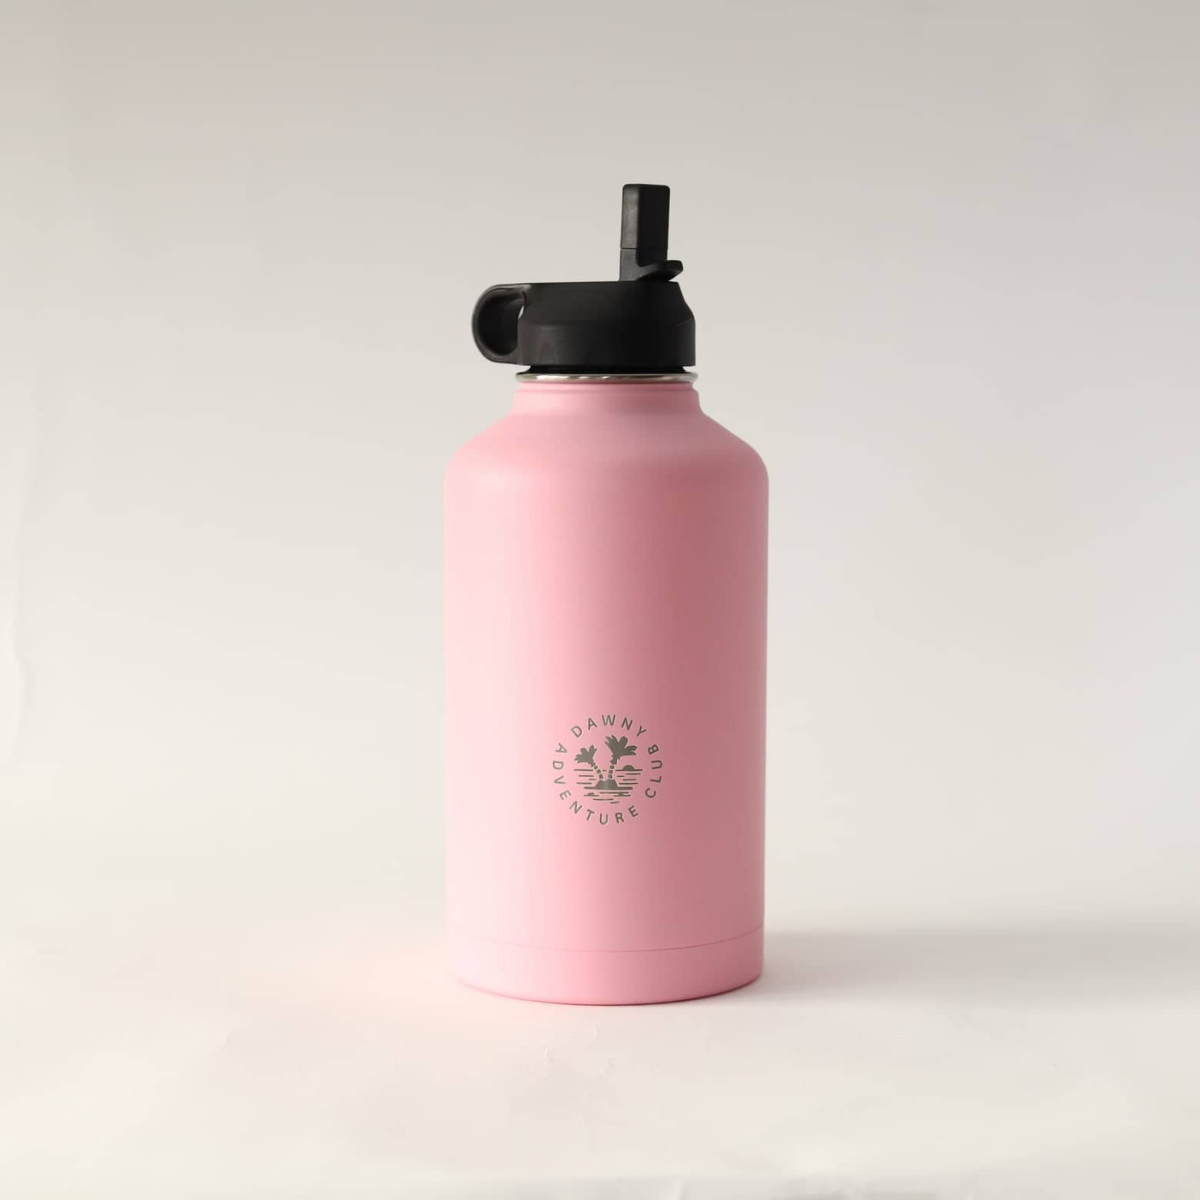 Dawny Adventure Water Bottles 1.9 Litres in Blush with Original Sipper Handle